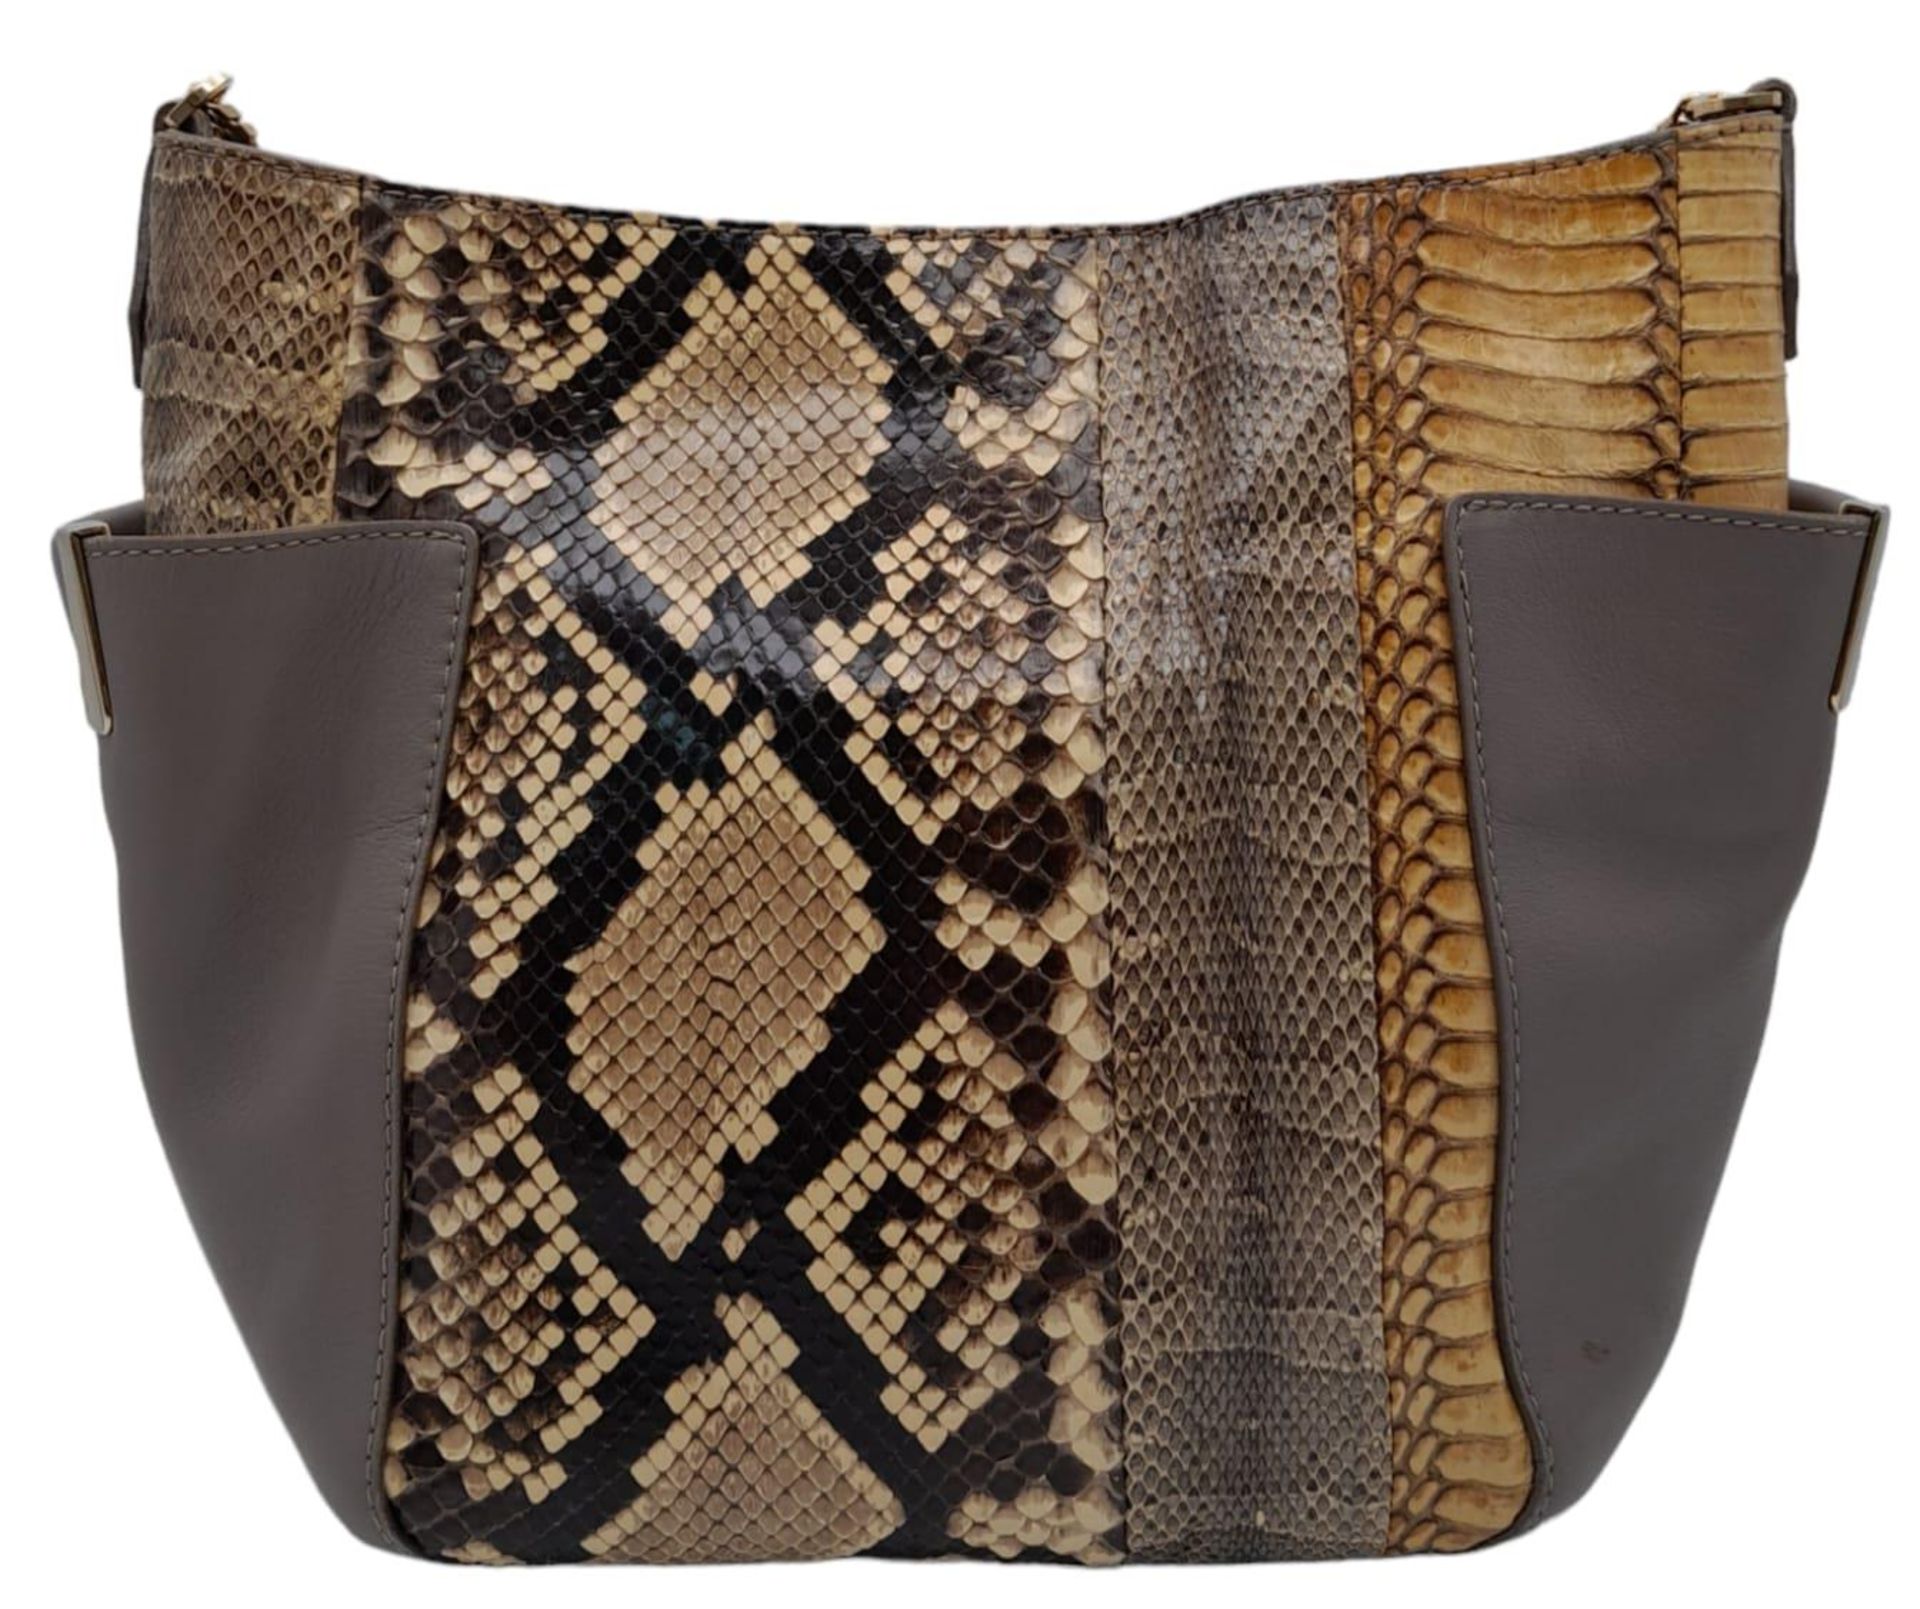 A Jimmy Choo Taupe Snakeskin Crossbody Bag. Snakeskin and leather exterior with gold-toned hardware, - Bild 3 aus 7